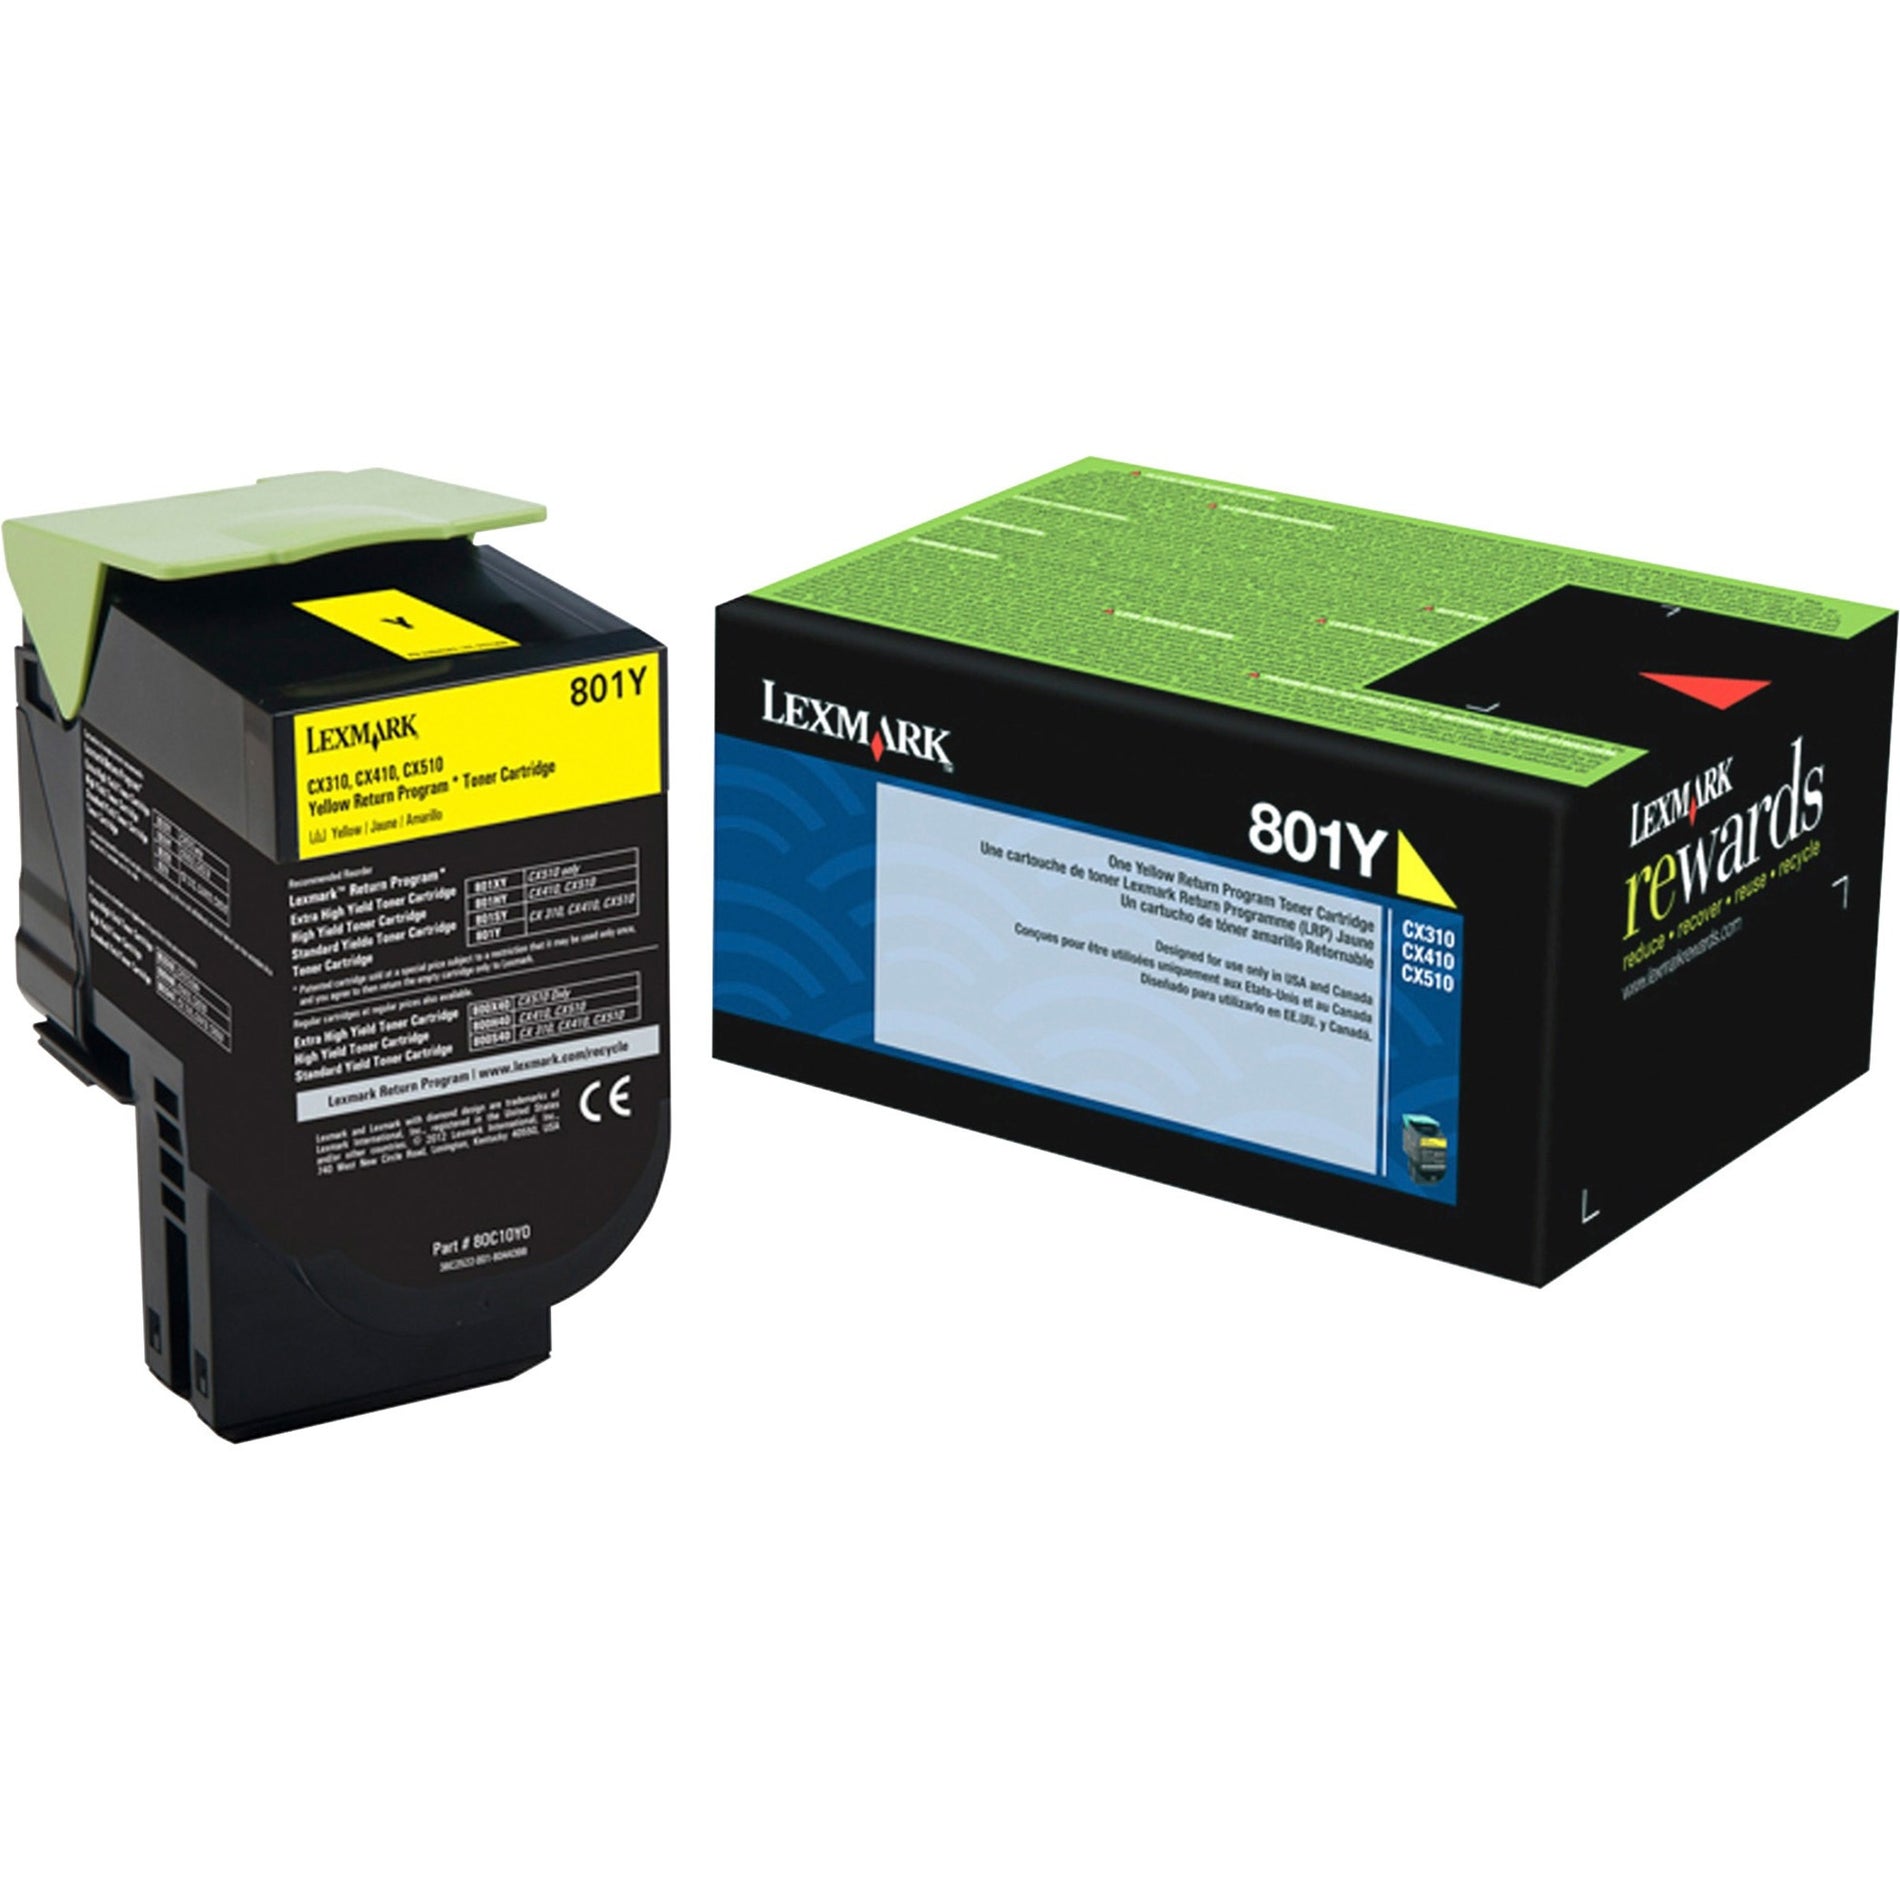 Lexmark 80C10Y0 801Y Unison Toner Cartridge, 1000 Pages Yield, Yellow